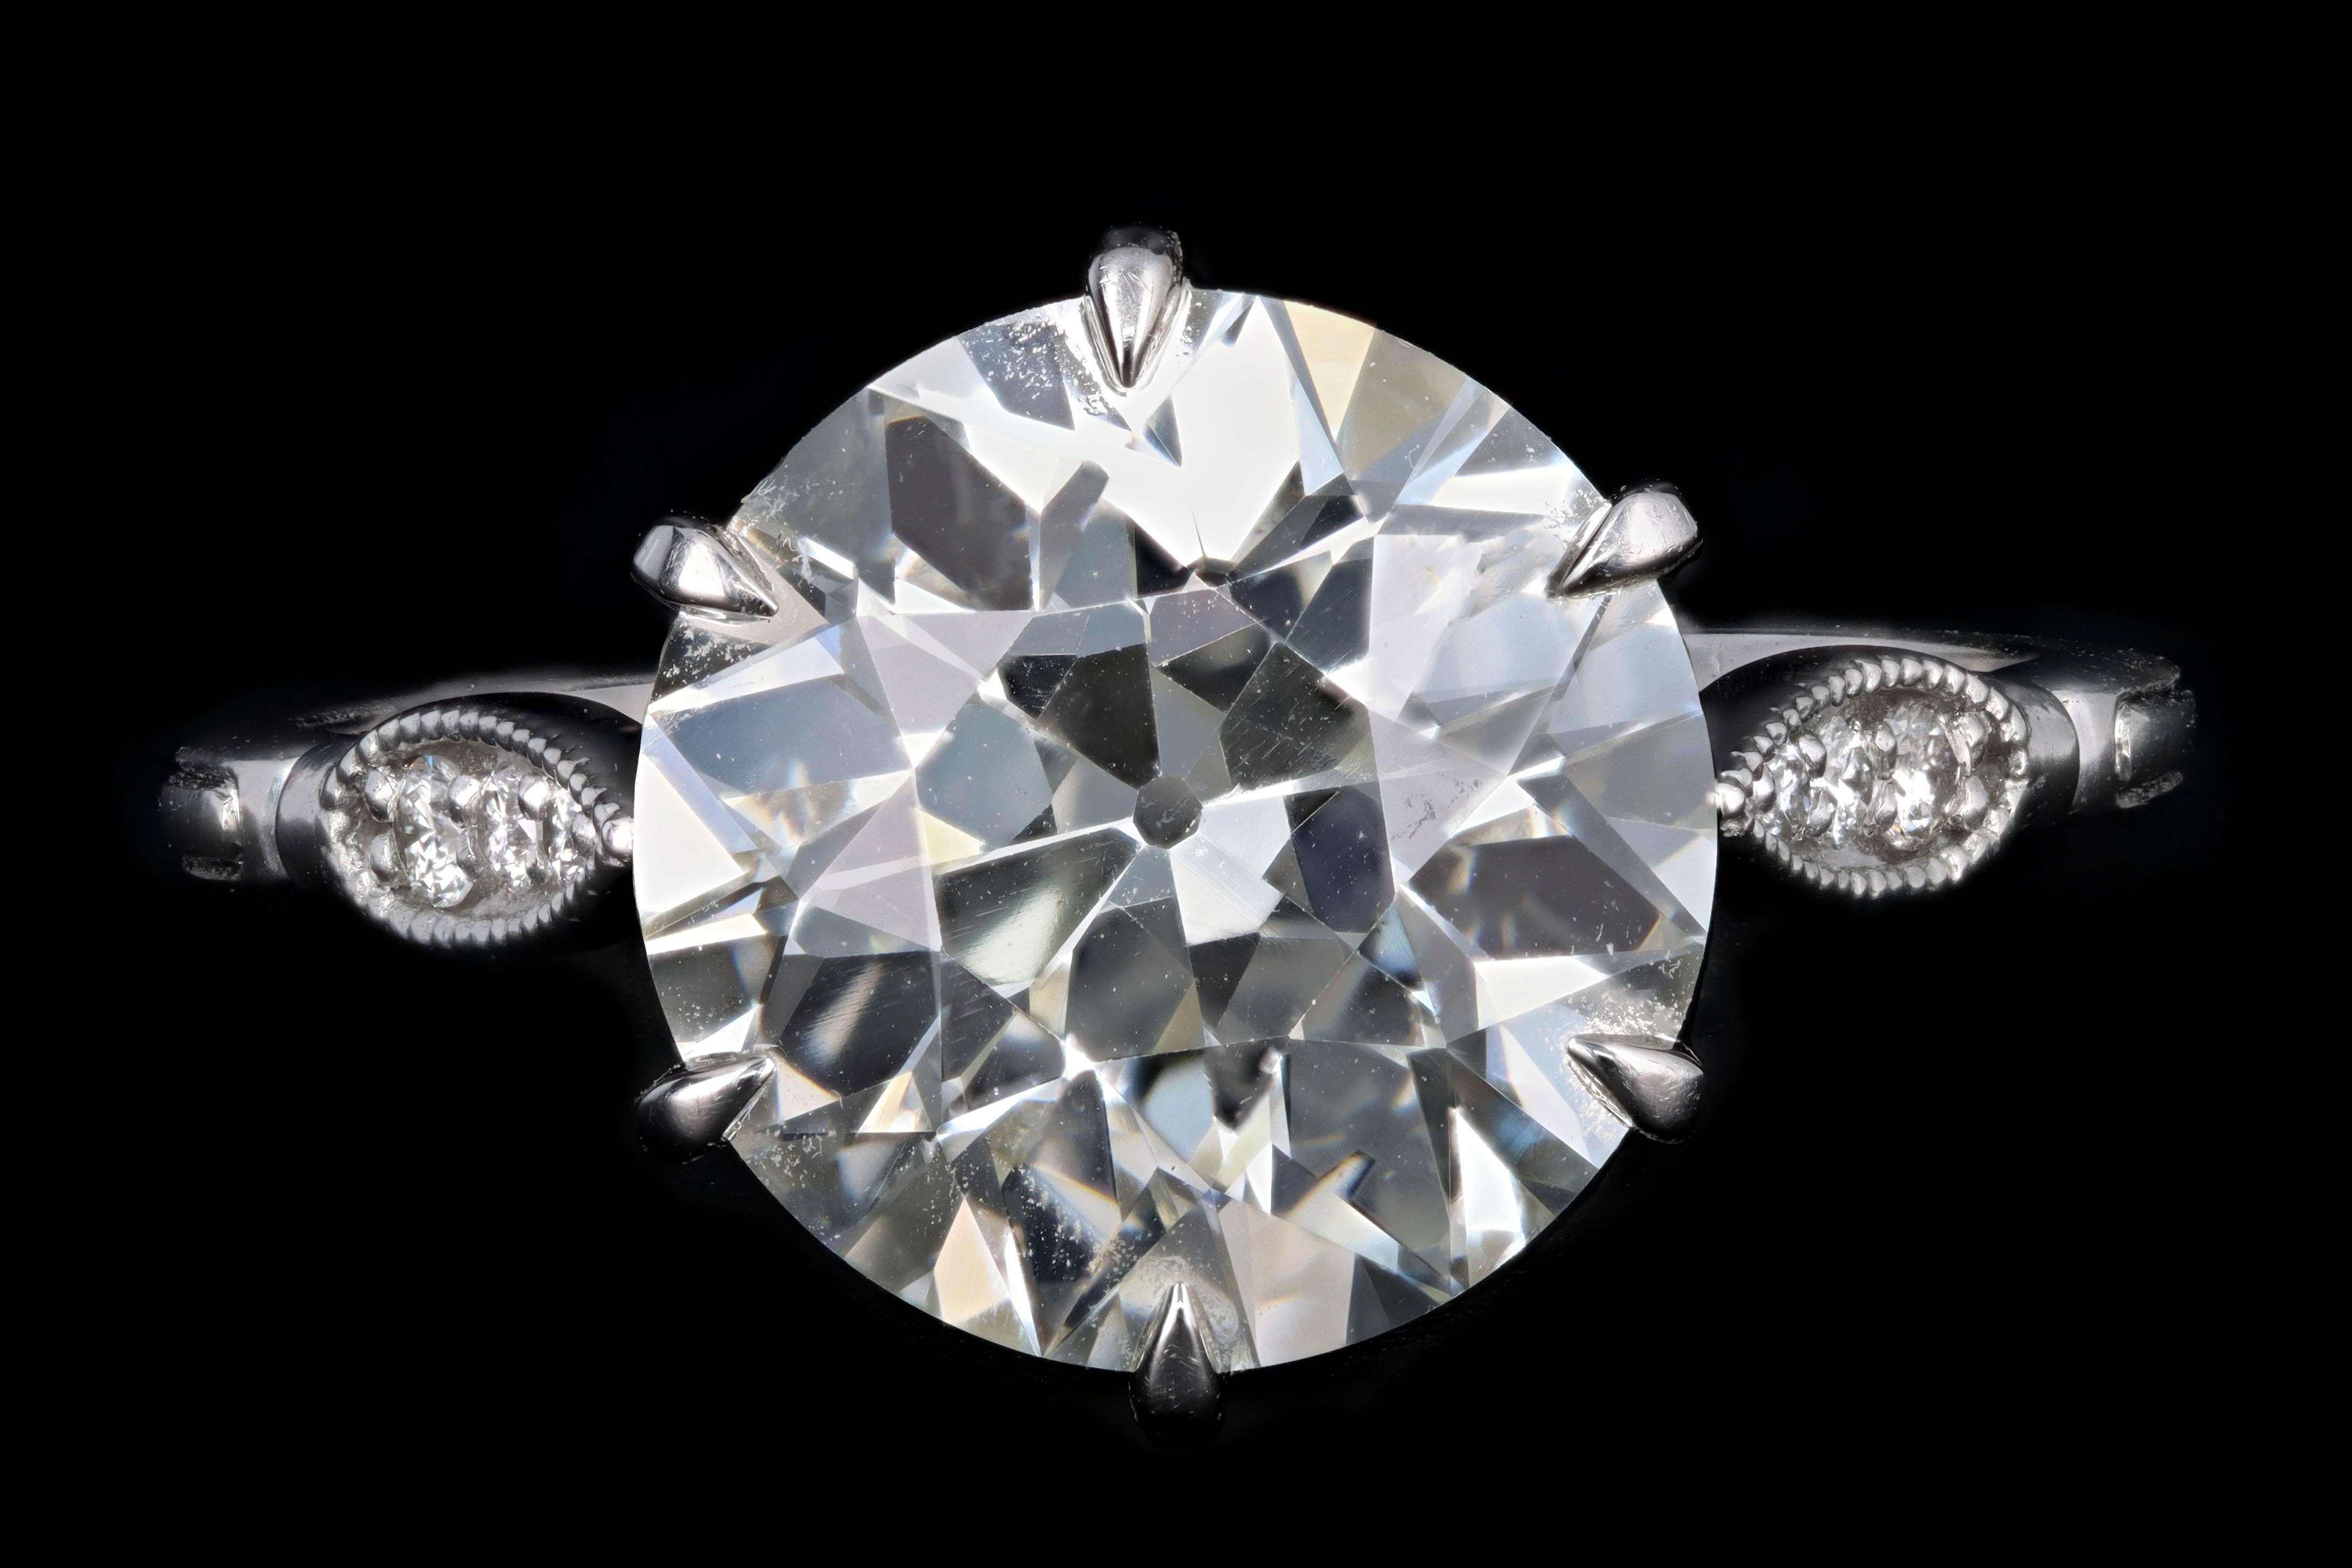 Era: New Vintage Inspired

Composition: Platinum

Primary Stone: Old European Cut Diamond

Carat Weight: 3.75 Carats

Color/Clarity: K / VS1

Accent Stone: Round Brilliant Diamonds

Carat Weight: .057 Carat Total

Color/Clarity: G/H - VS1/2

Total